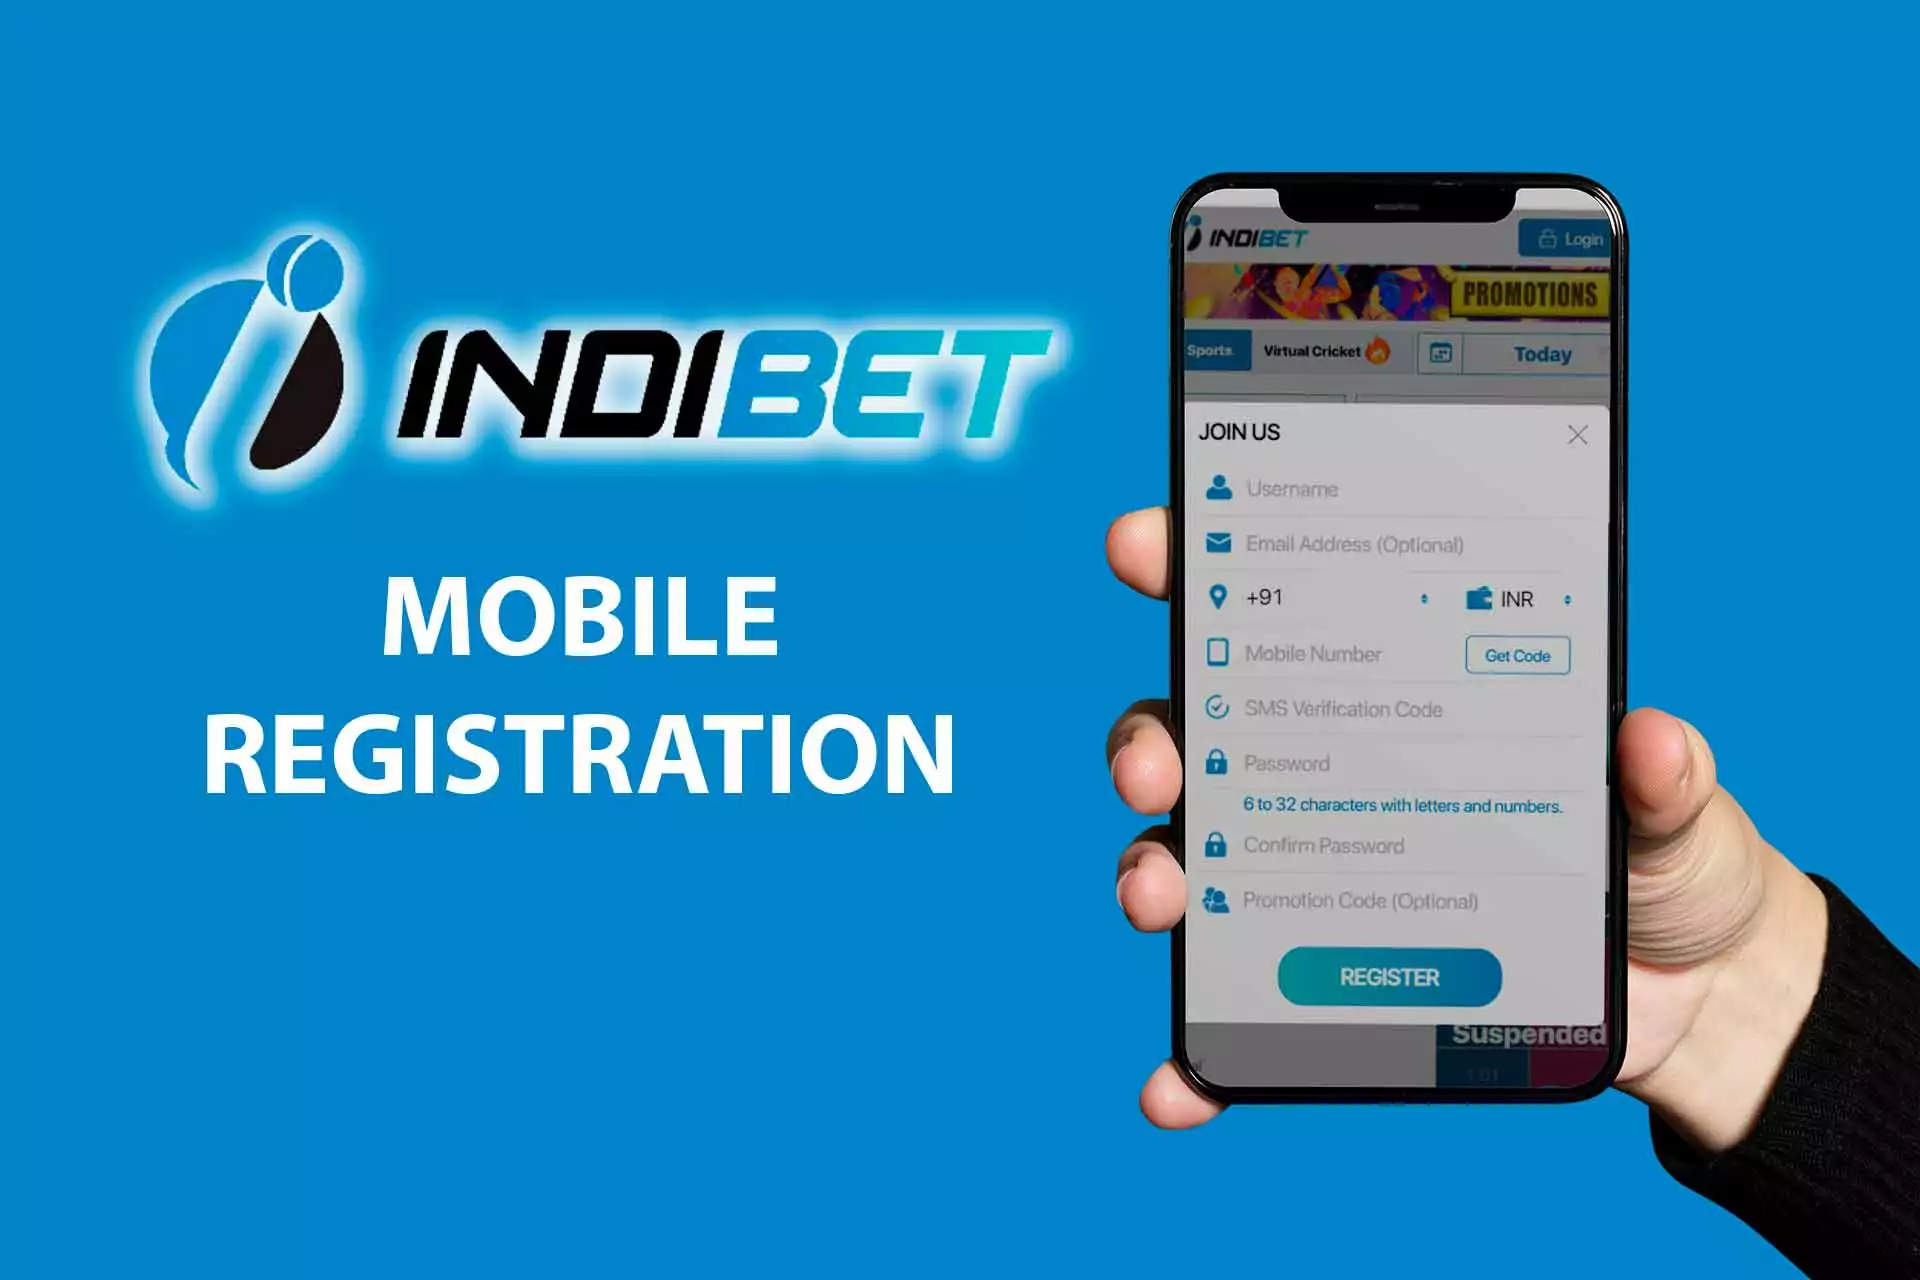 indibet registration and account verification. sign up and login